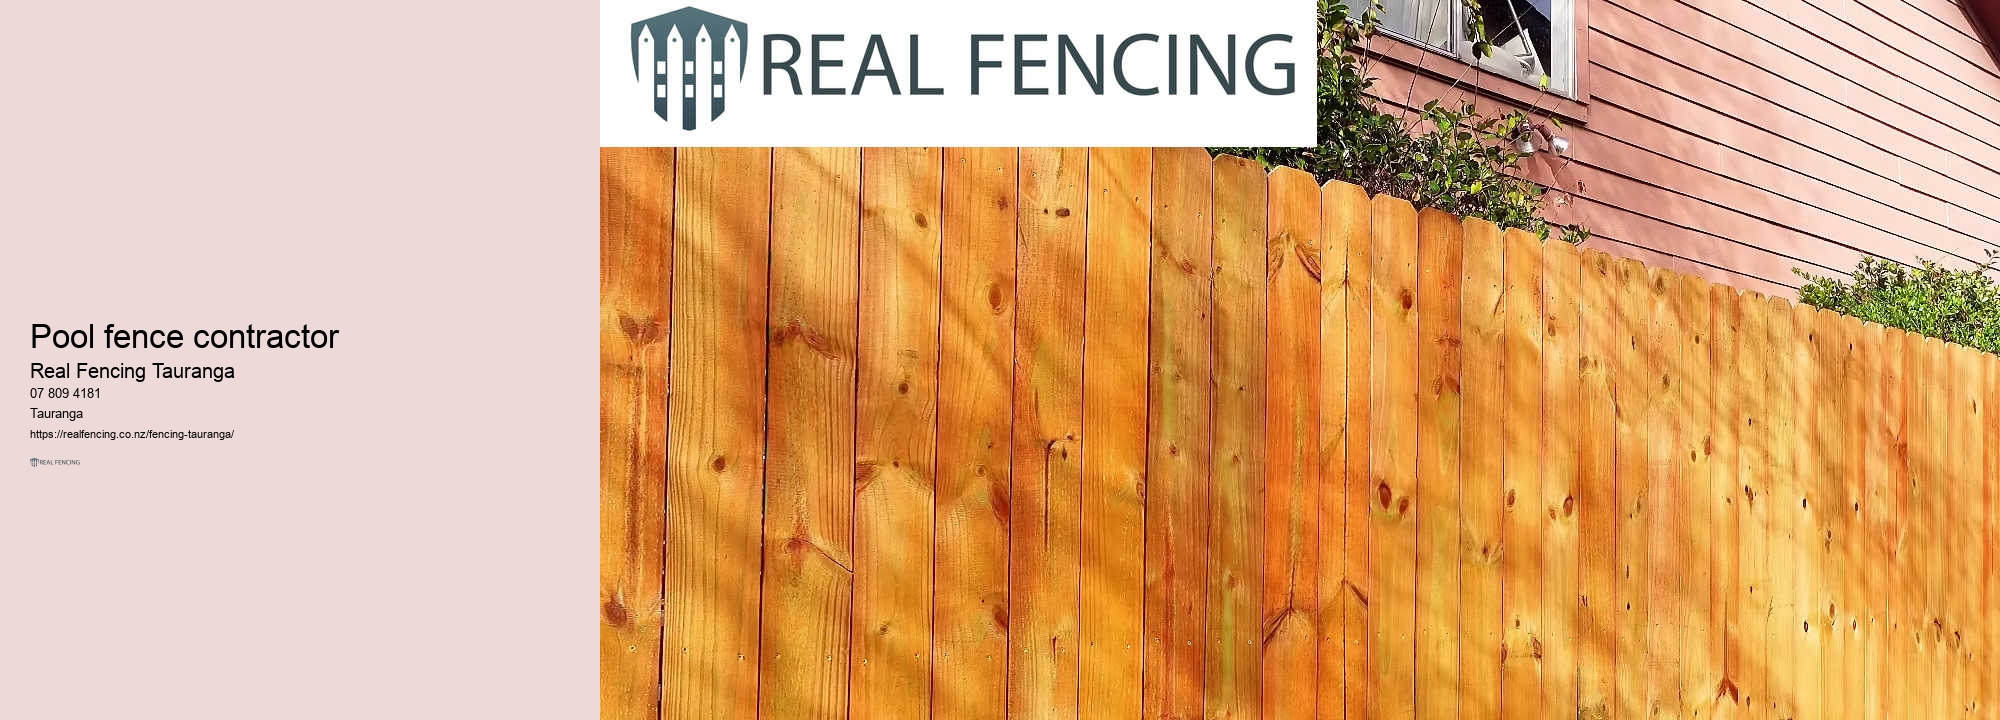 Pool fence contractor